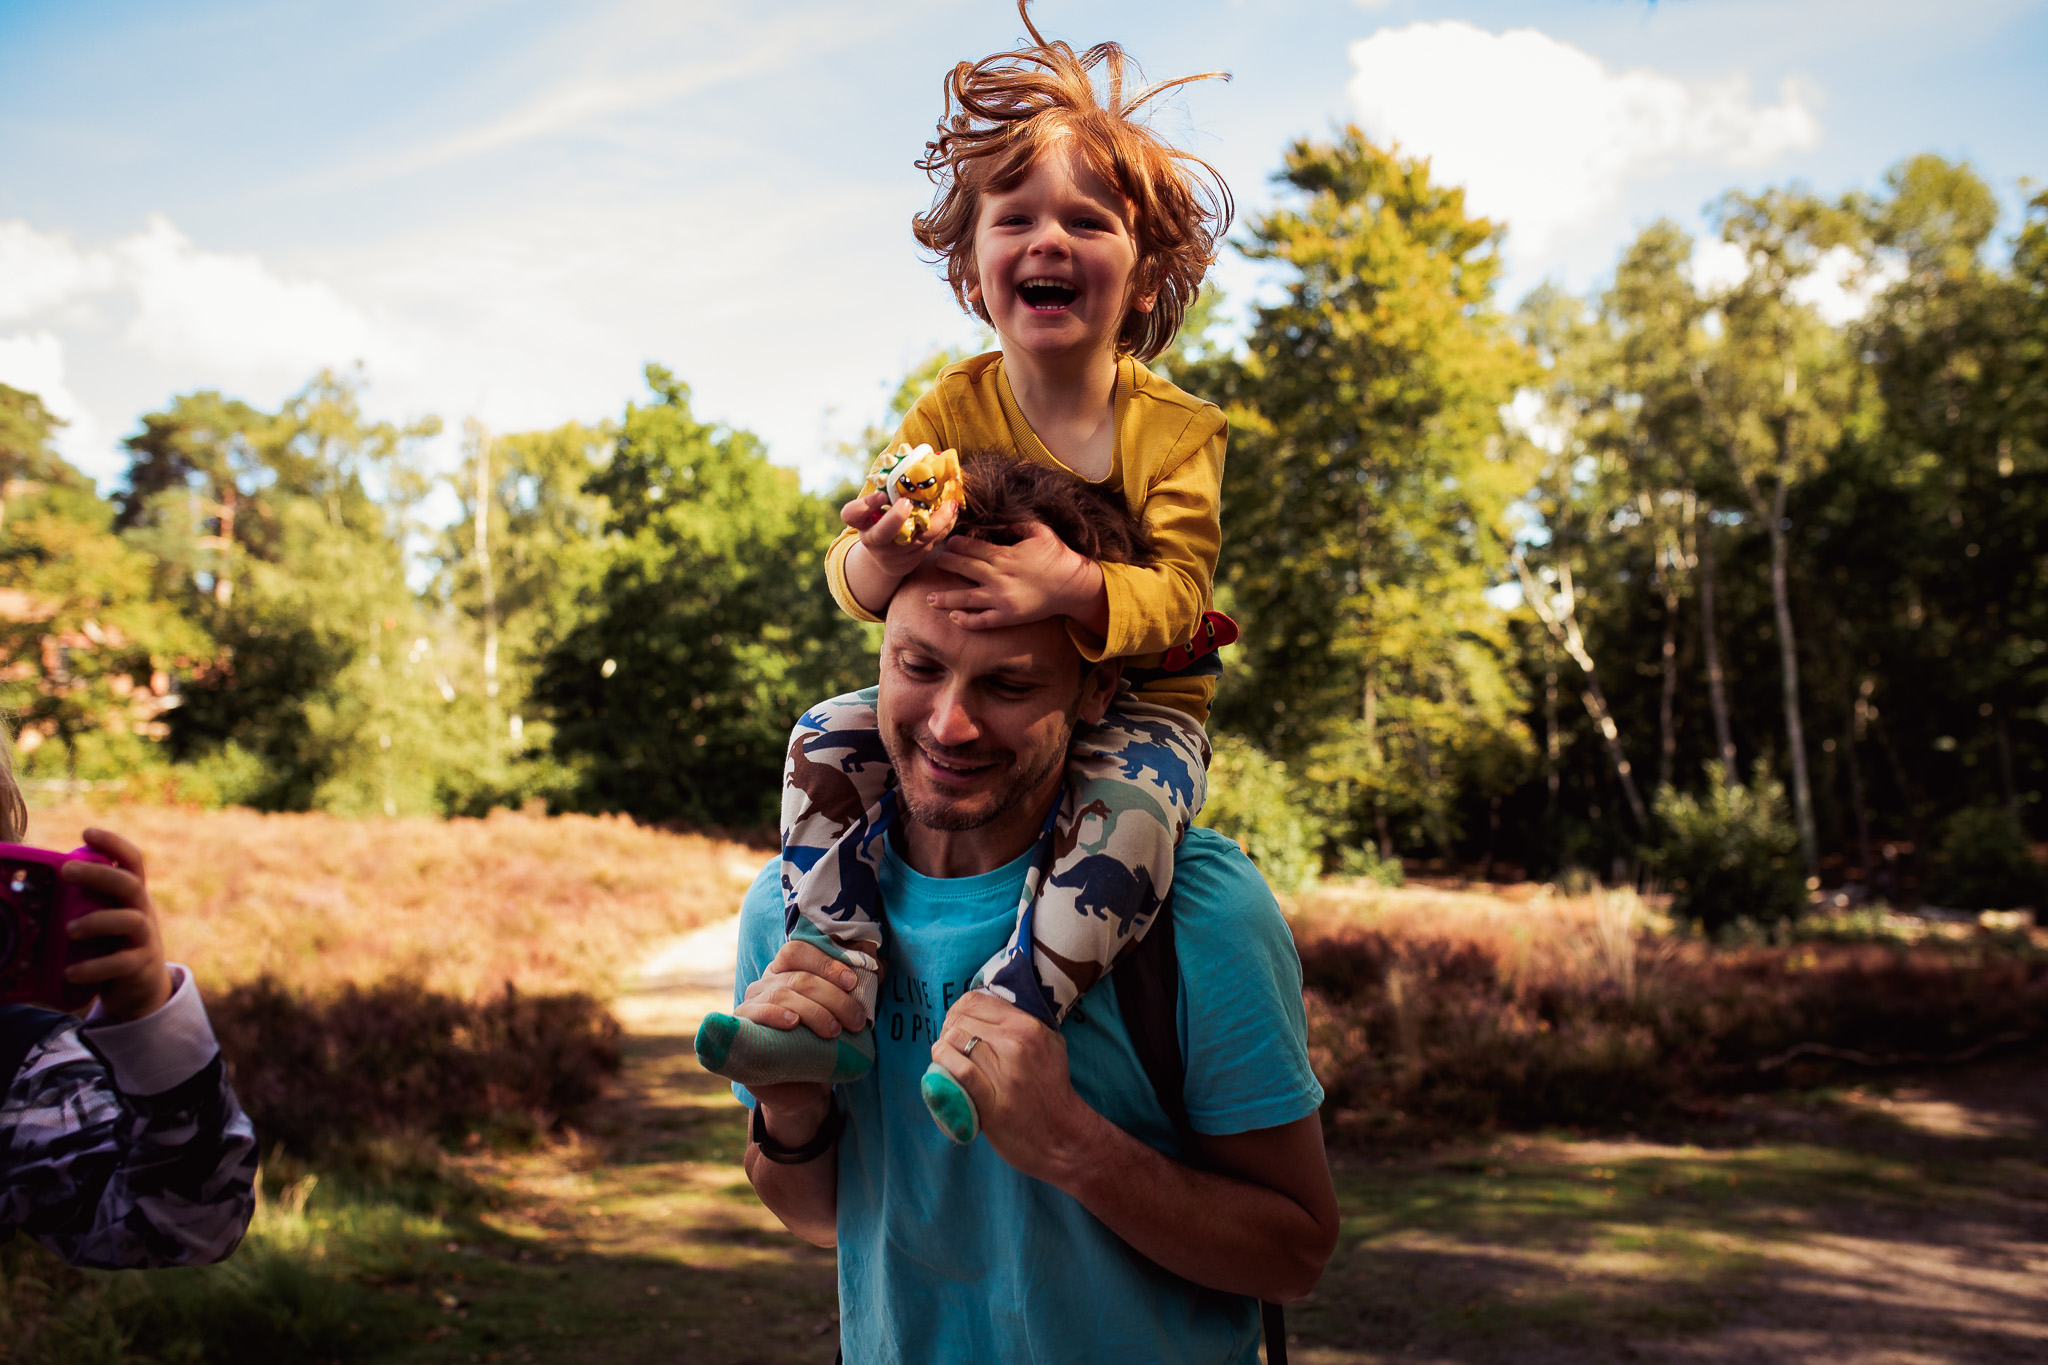 Dad bounces his laughing young son on his shoulders in a forest during a family photo session.